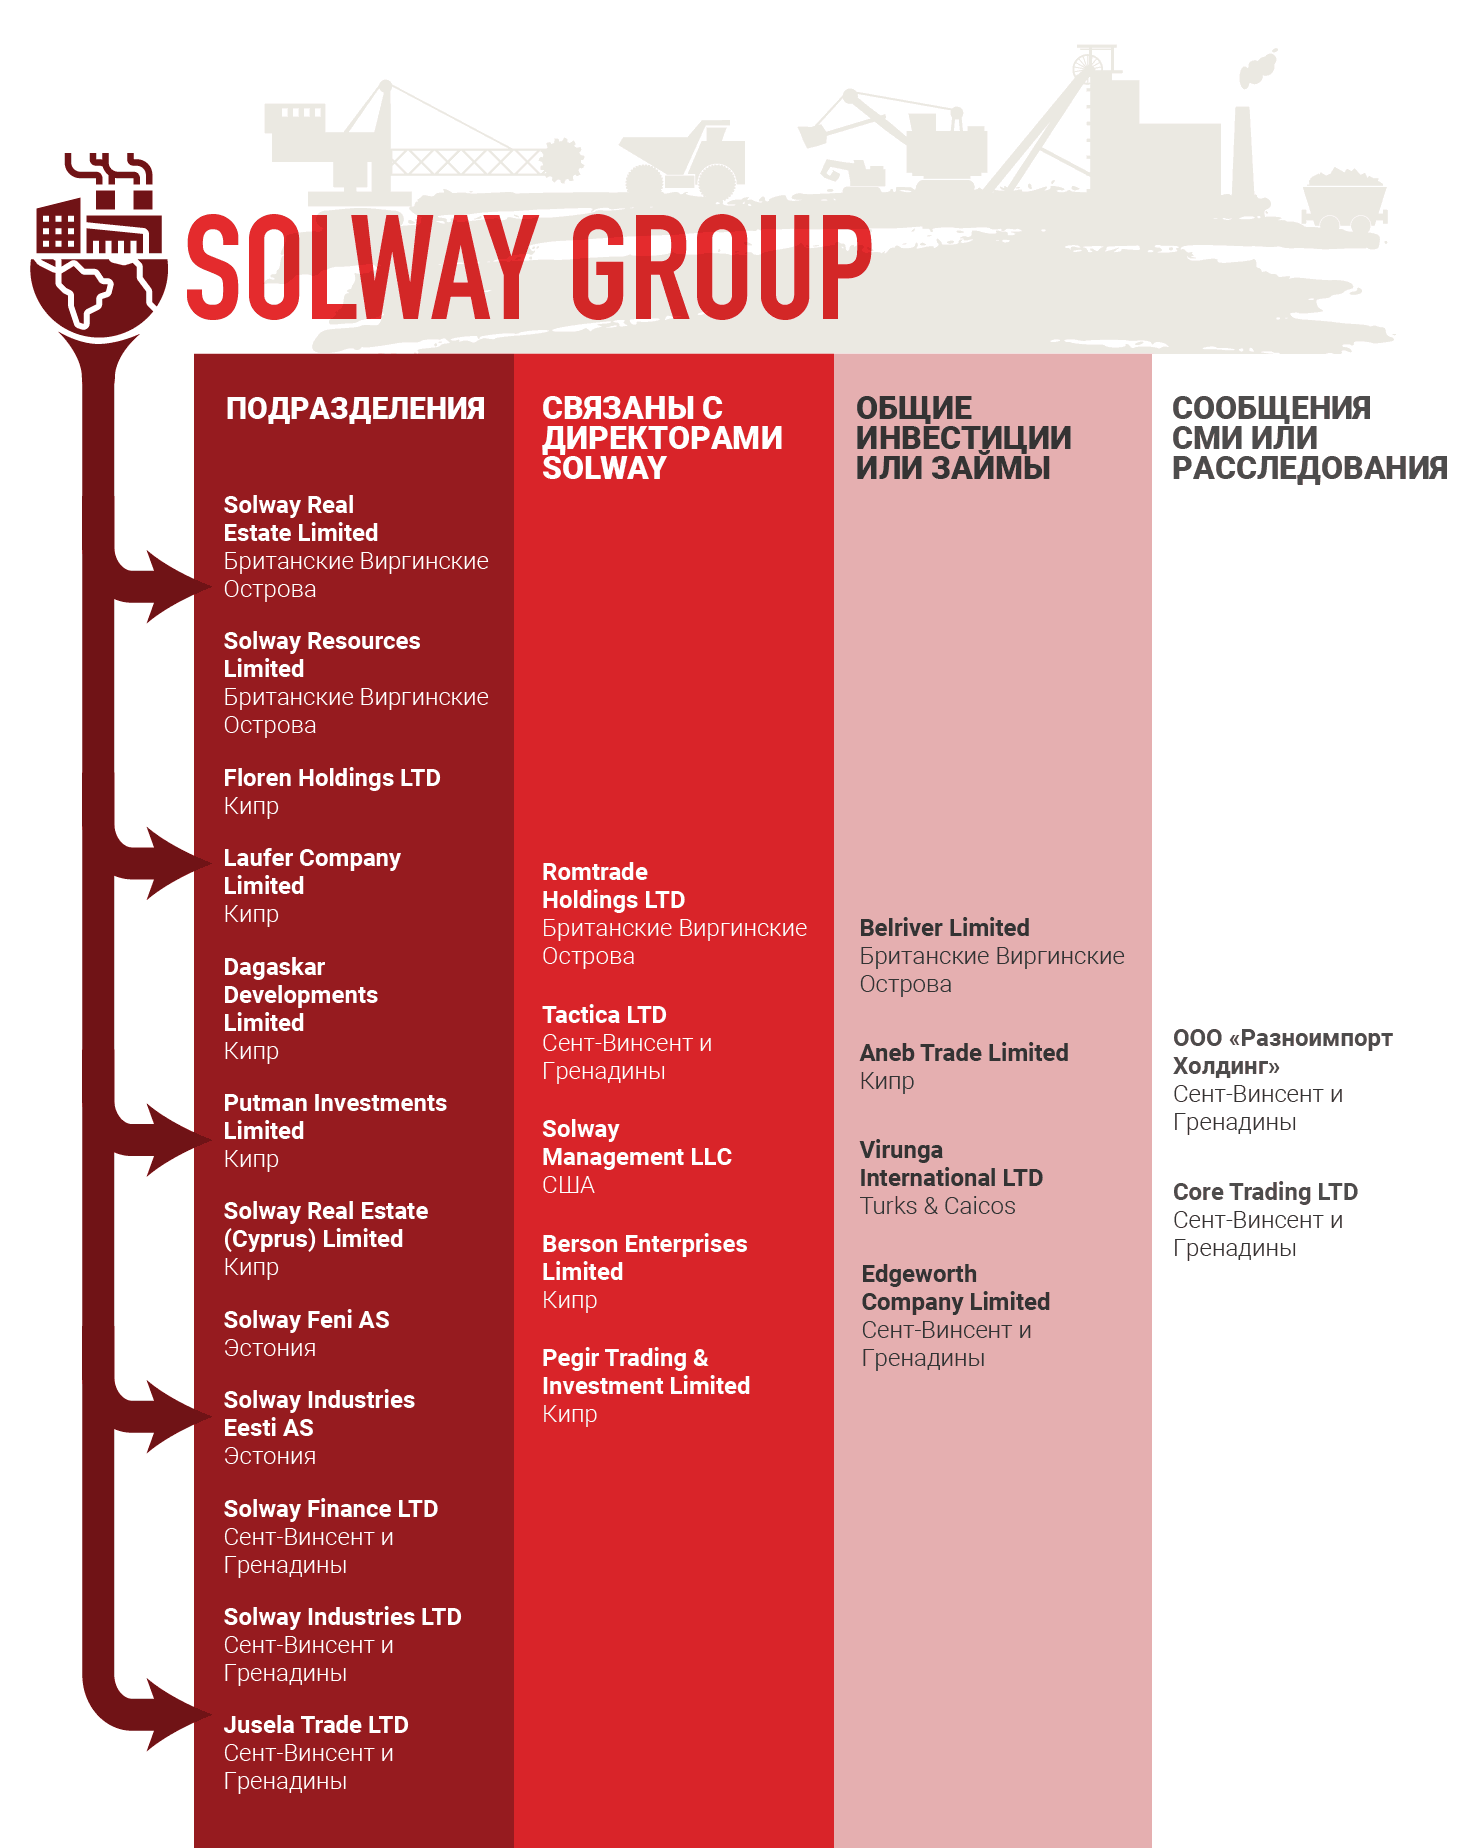 investigations/Solyway-Group-Infographic-RUS.png